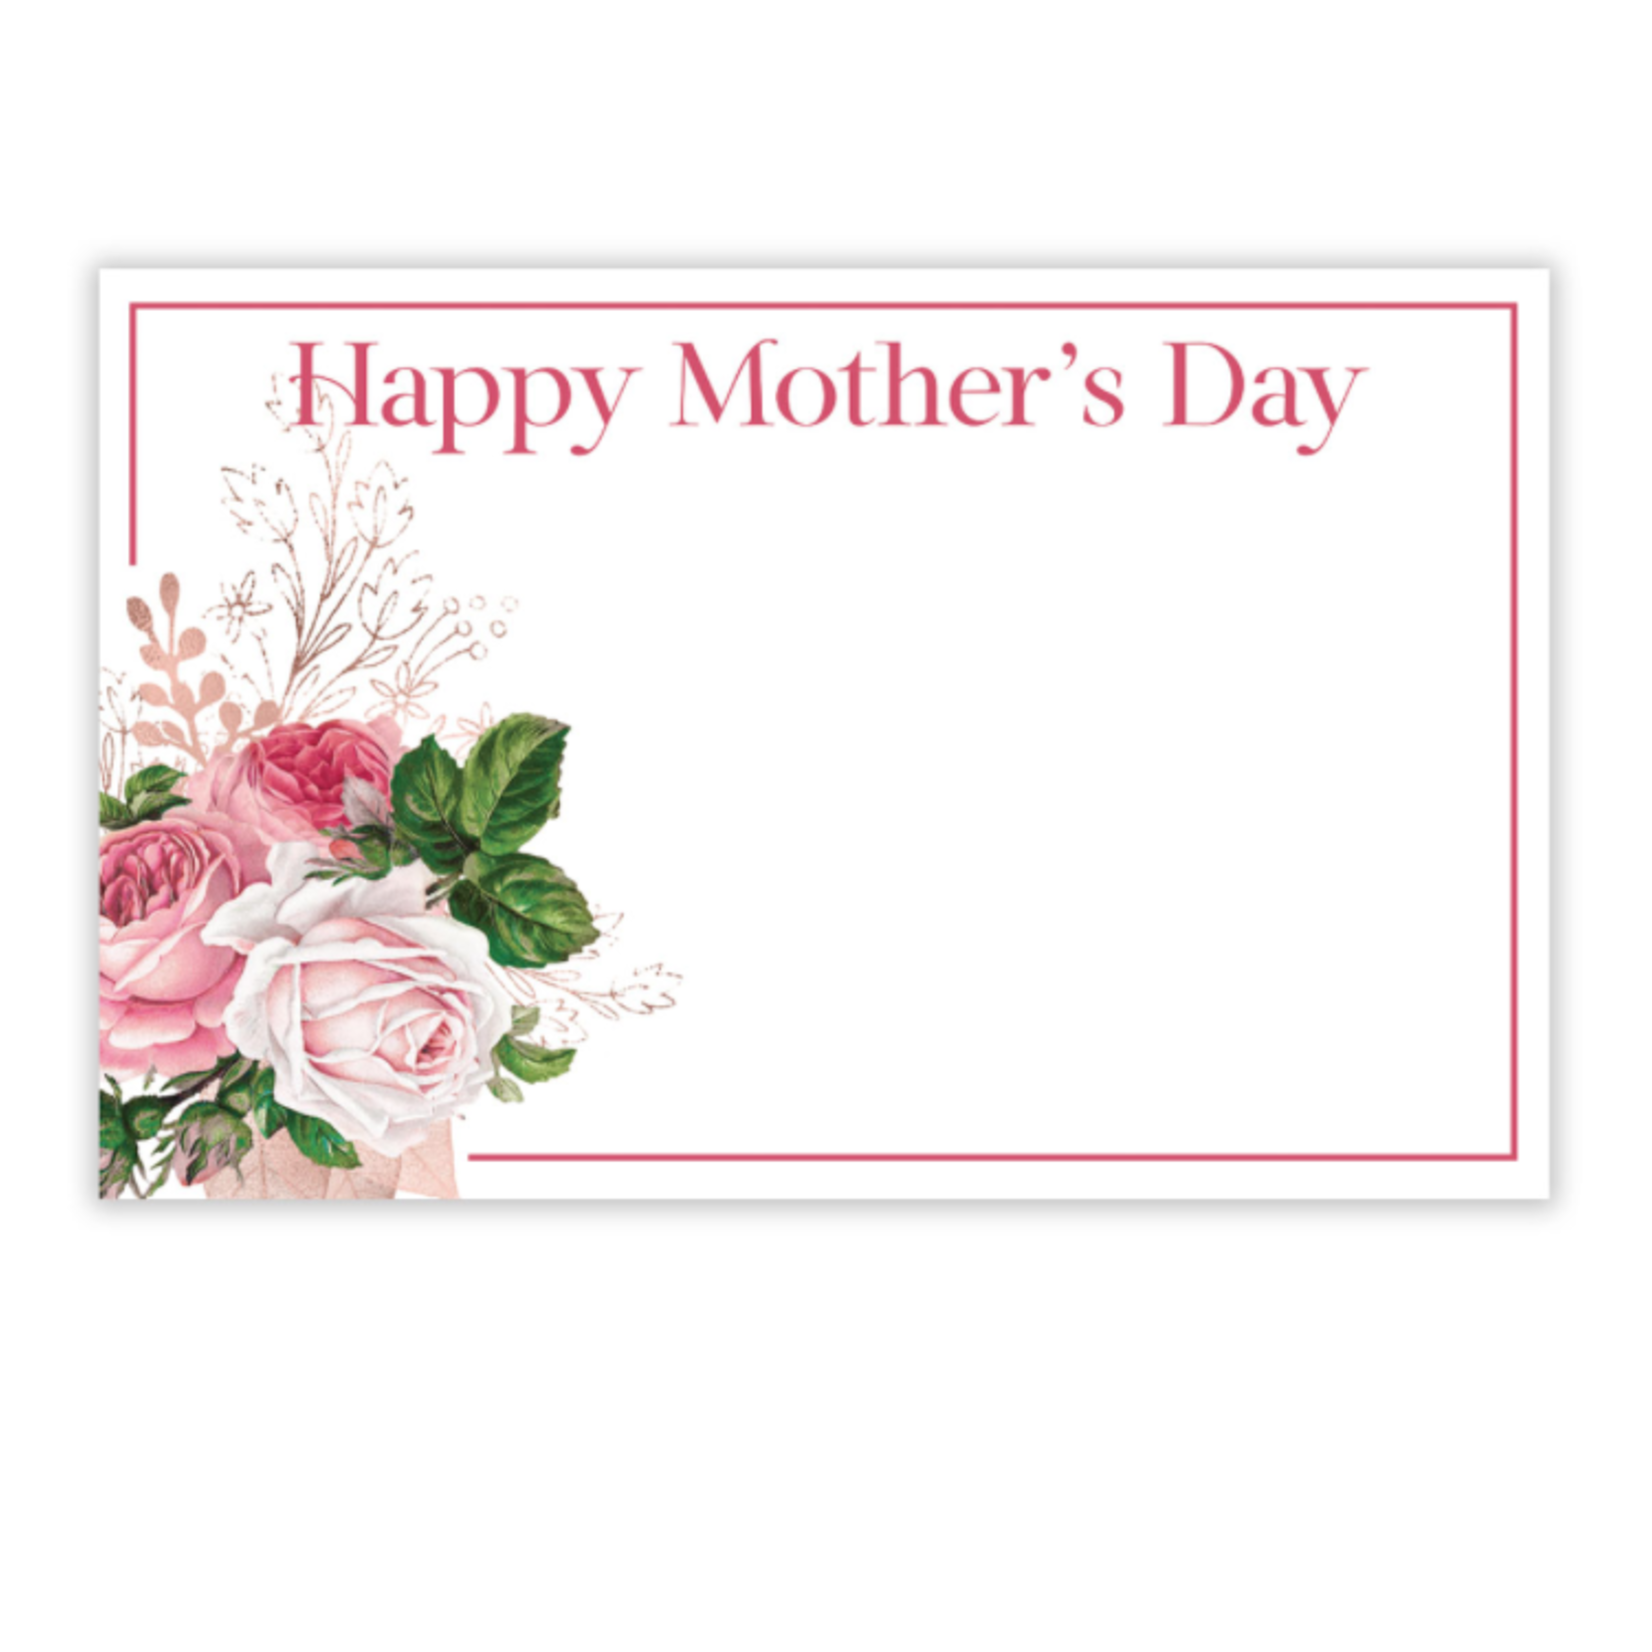 "HAPPY MOTHERS DAY" CAPRI CARDS, PINK ROSES